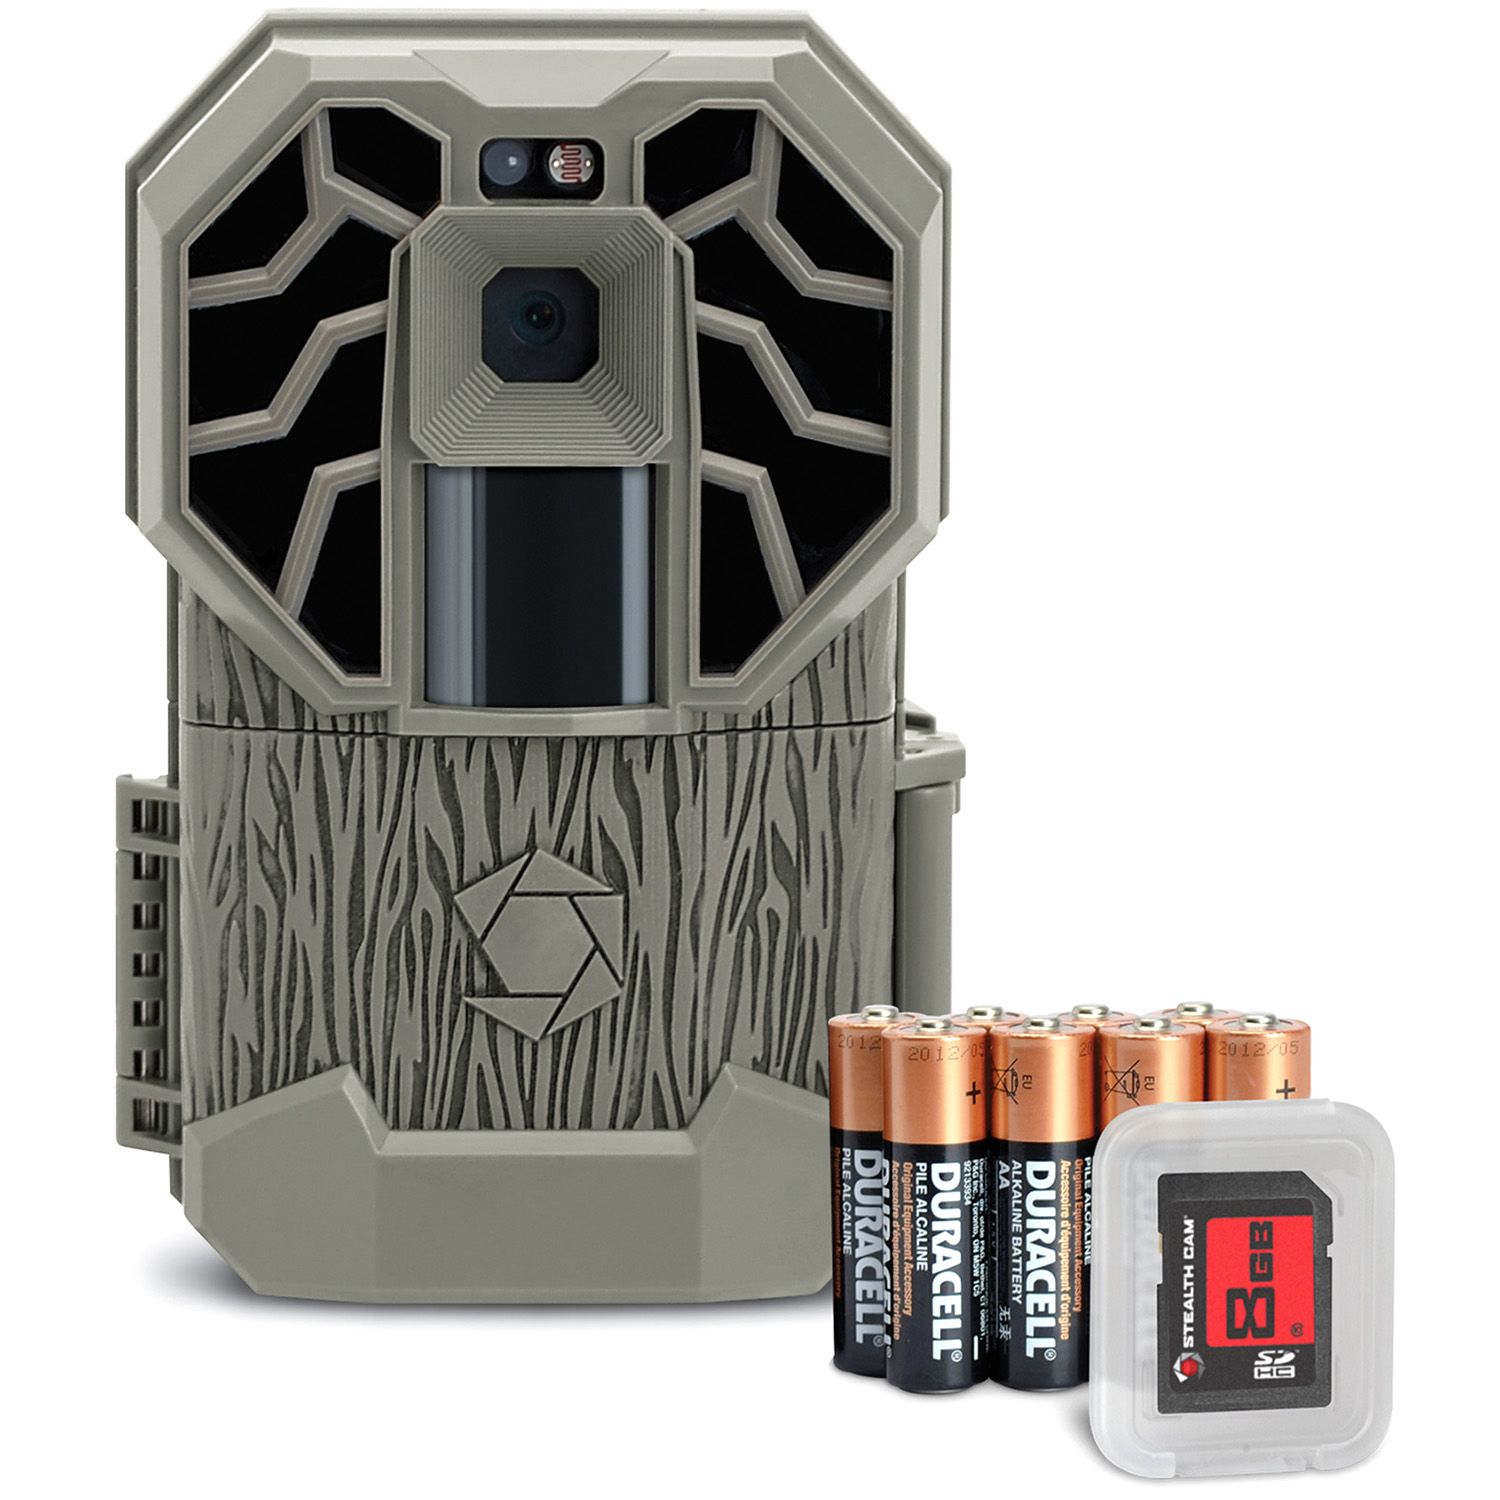 StealthCam G26NG PRO Trail Camera with 8GB SD Card & Batteries